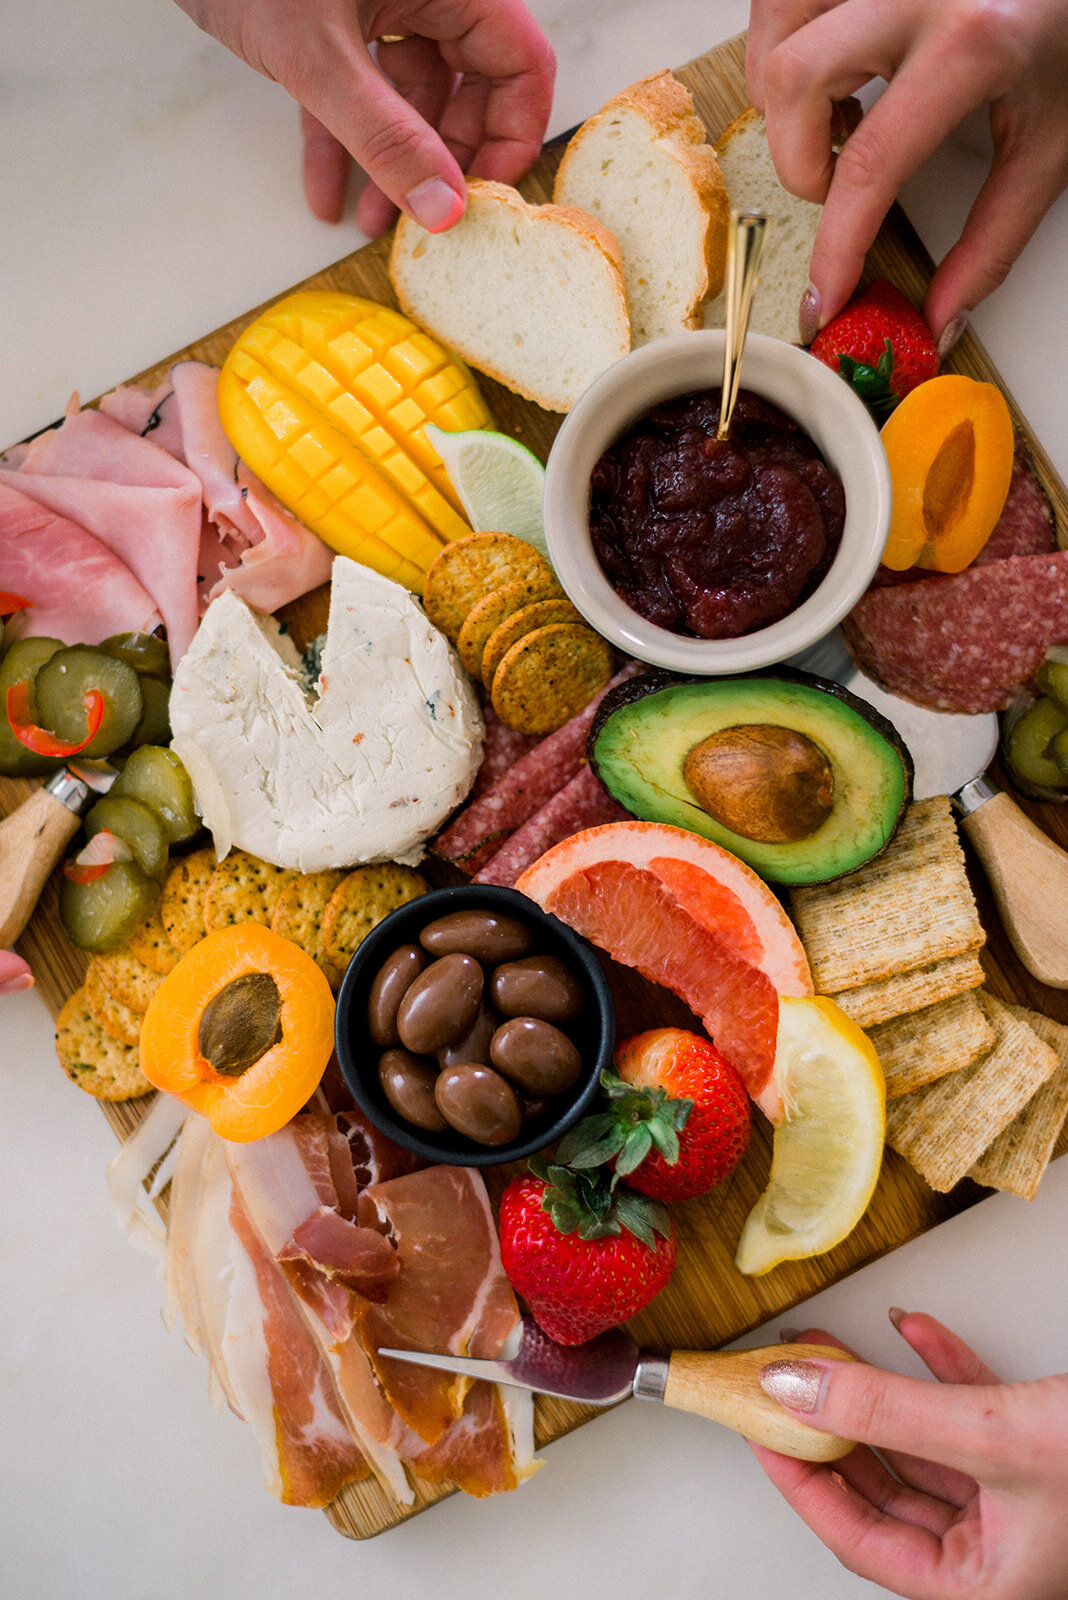 8 Staple Ingredients For The Perfect Charcuterie Board - on the Bronte Bride Blog